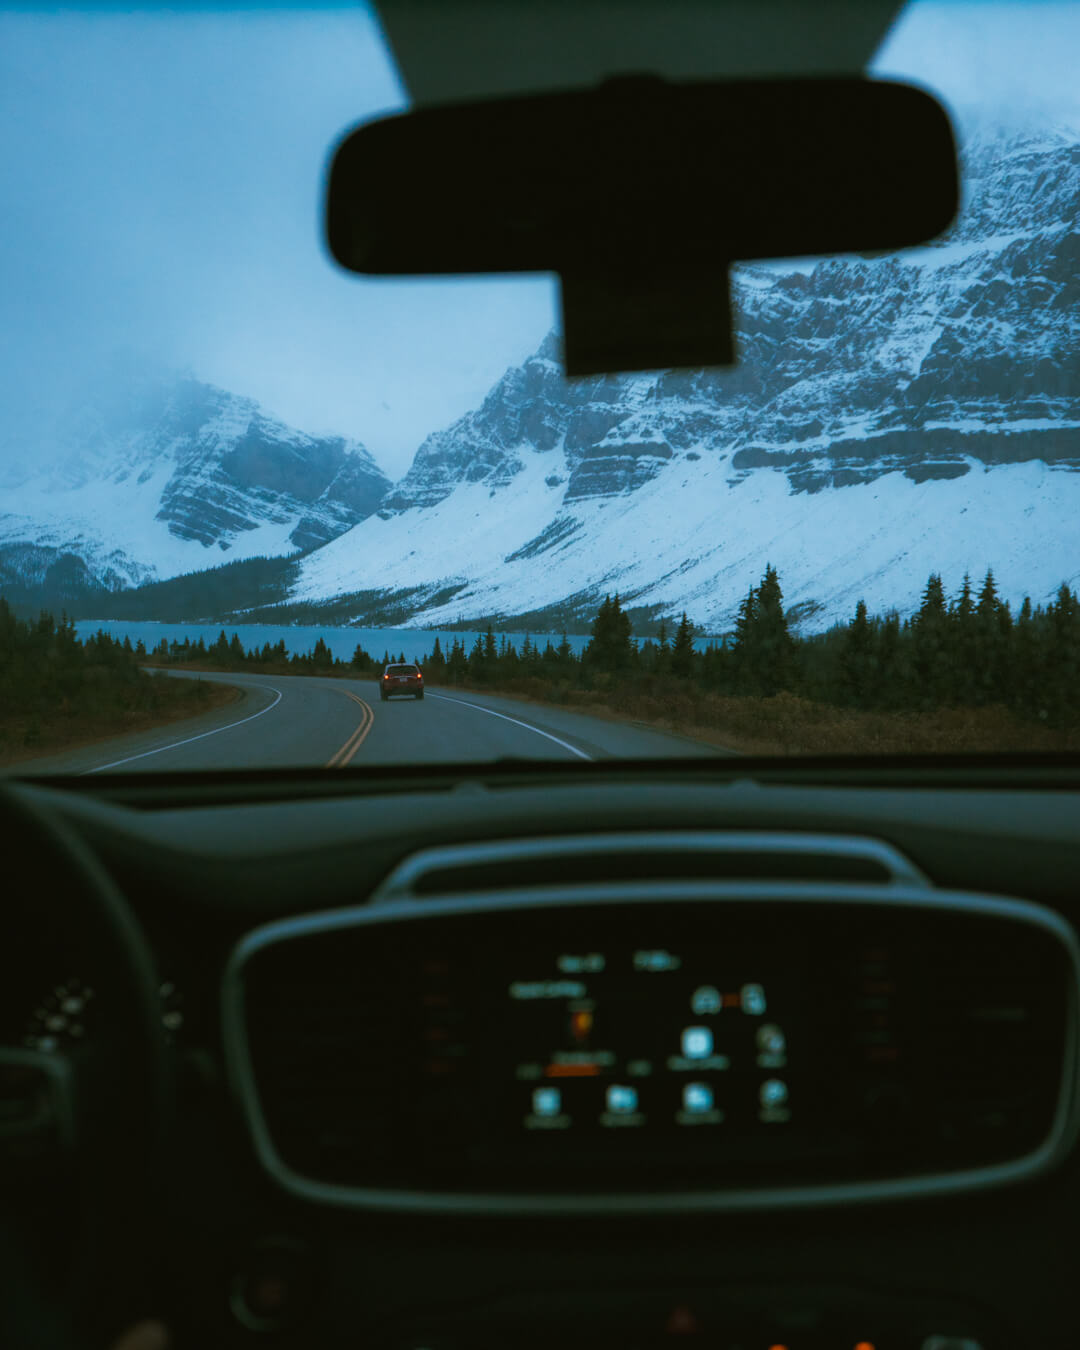 view of inside a car while driving through Banff in winter